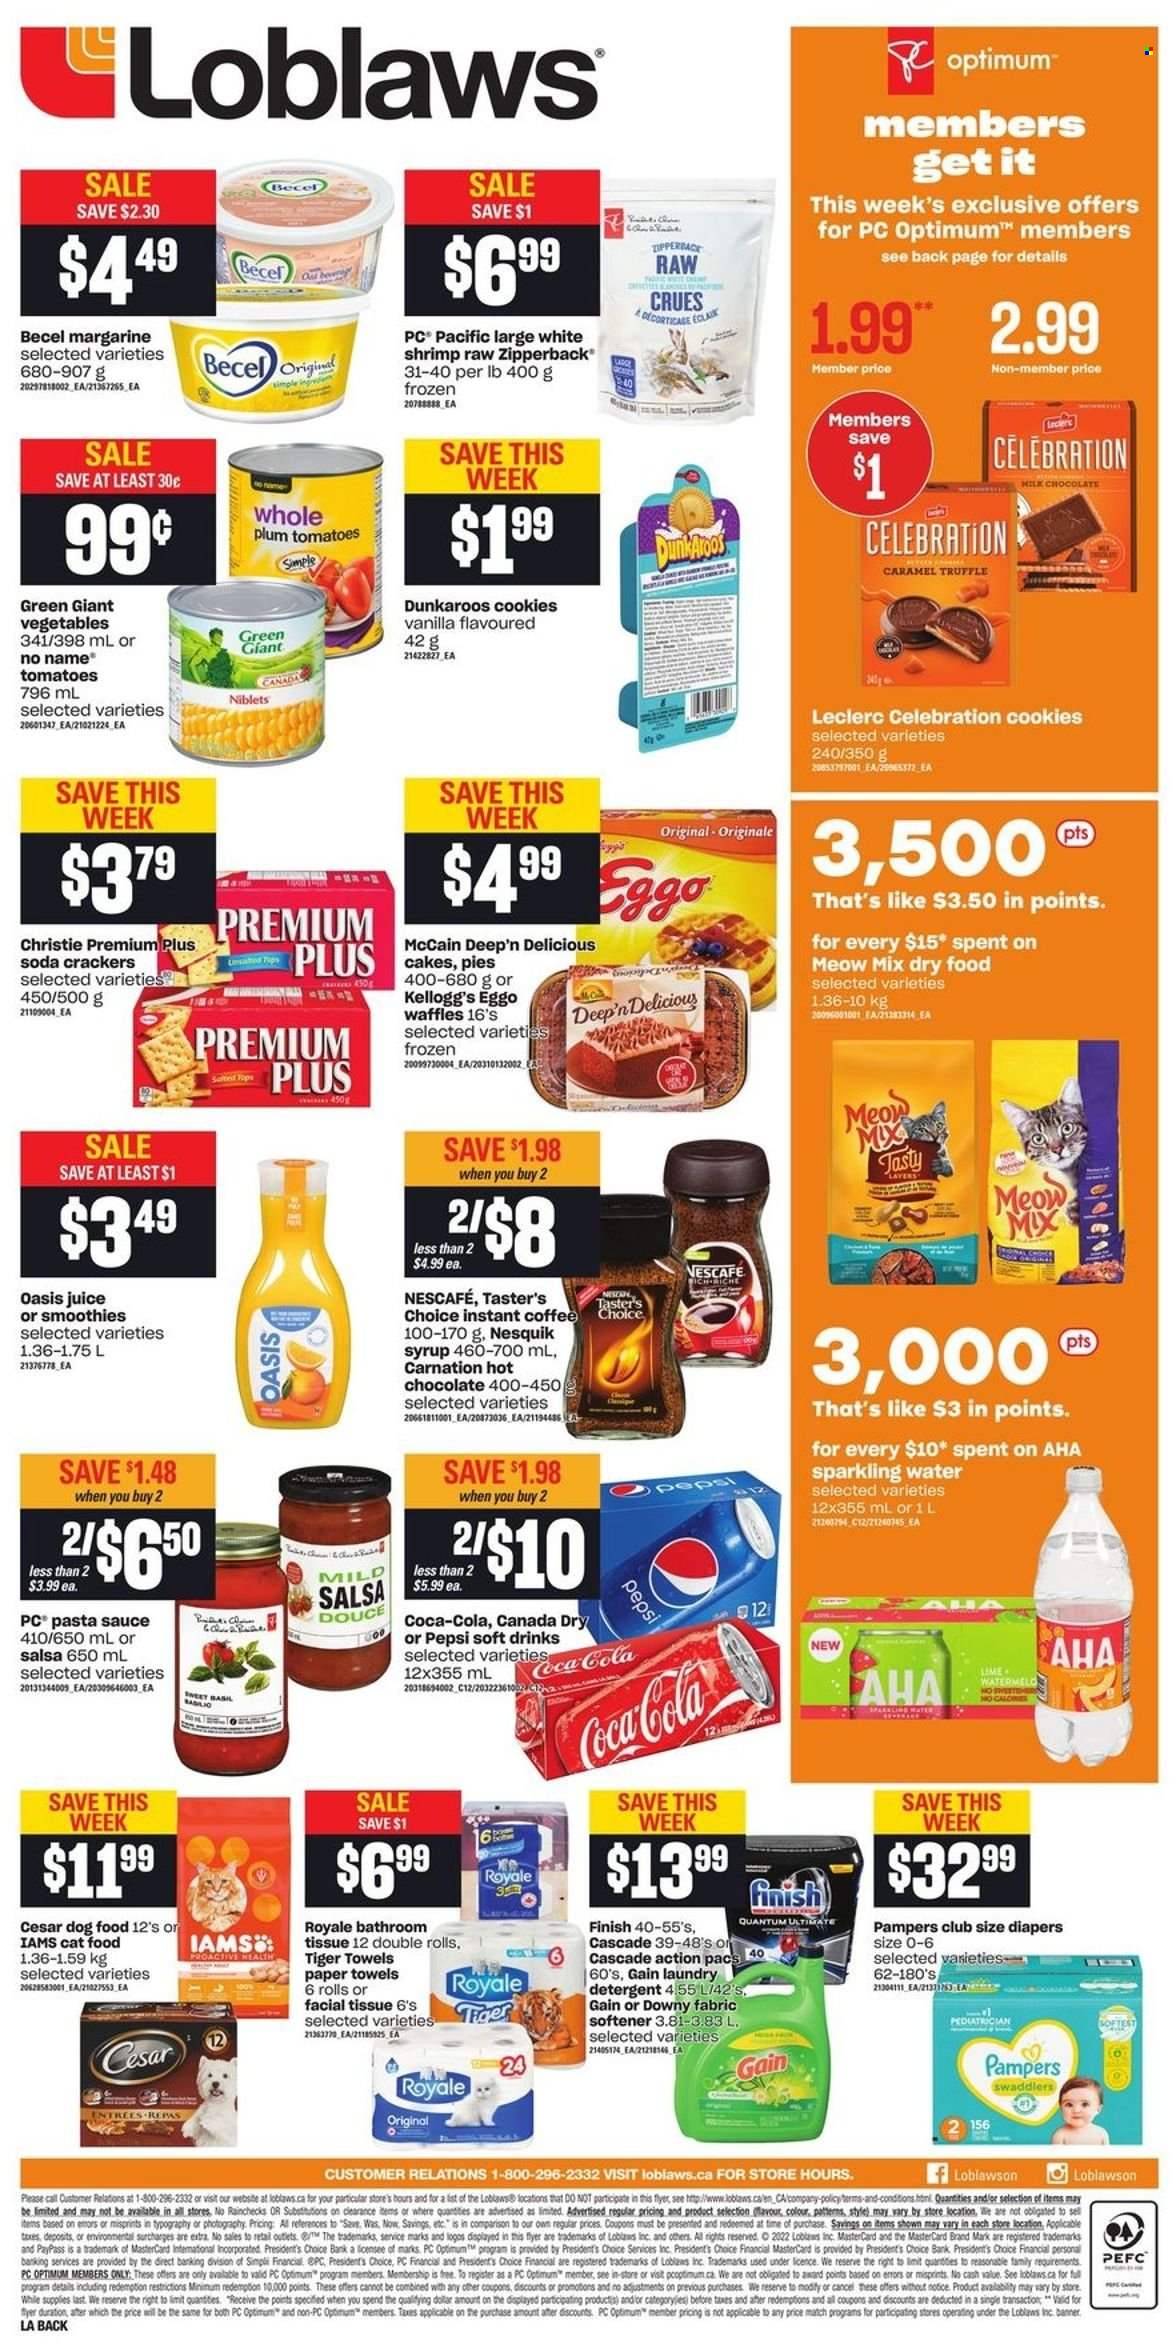 thumbnail - Loblaws Flyer - January 13, 2022 - January 19, 2022 - Sales products - cake, waffles, tomatoes, shrimps, No Name, pasta sauce, sauce, Président, margarine, McCain, cookies, truffles, Celebration, crackers, Kellogg's, salsa, syrup, Canada Dry, Coca-Cola, Pepsi, juice, soft drink, soda, sparkling water, hot chocolate, instant coffee, nappies, bath tissue, kitchen towels, paper towels, Gain, fabric softener, laundry detergent, Cascade, Downy Laundry, animal food, cat food, dog food, Optimum, Meow Mix, Iams, Nesquik, detergent, Pampers, Nescafé. Page 2.